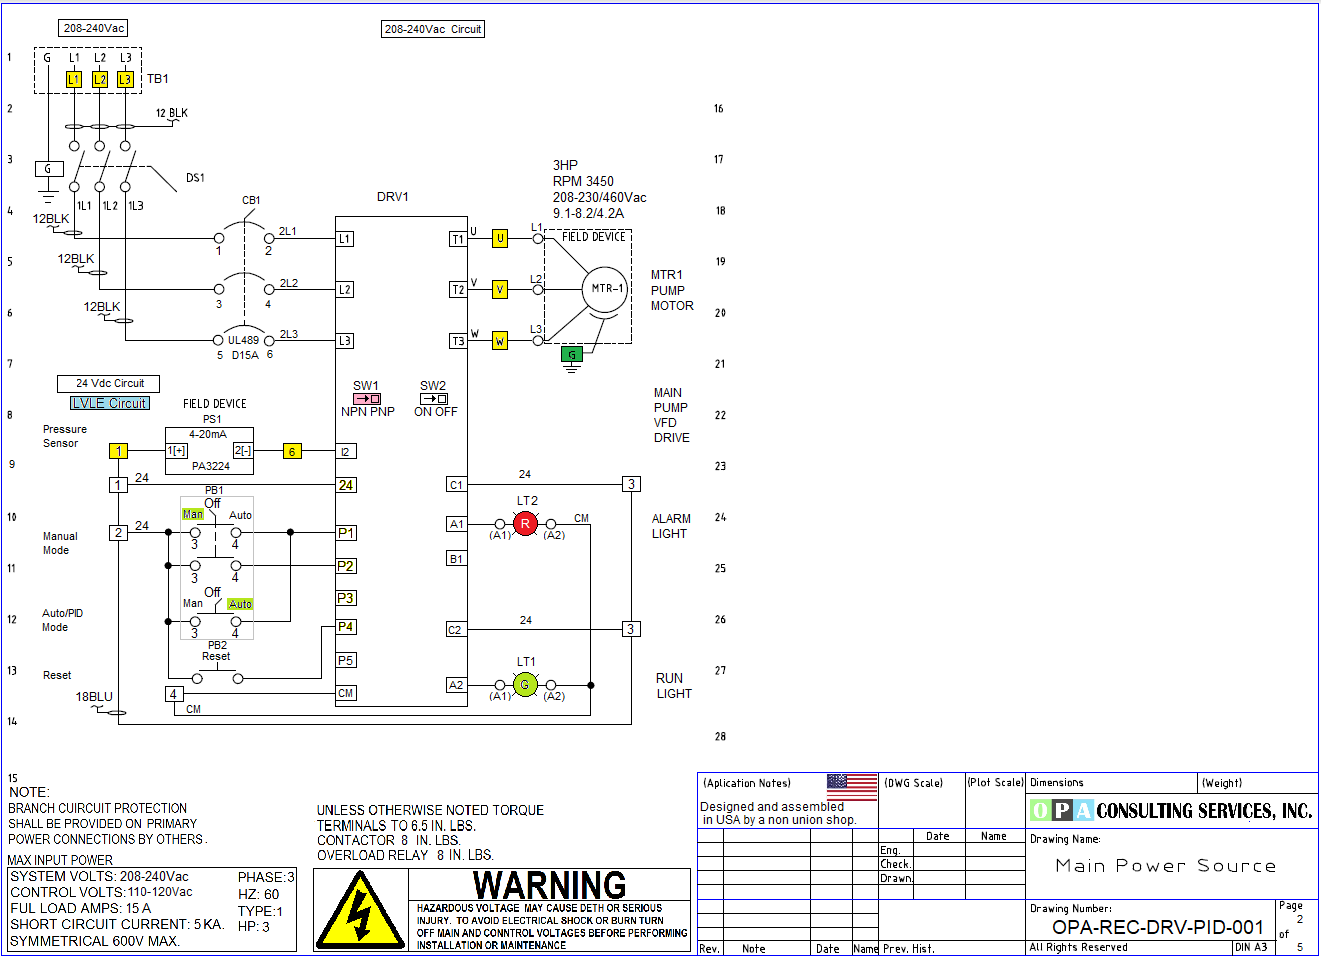 Constant Pressure Pump Controller Drawing ... Free to Download